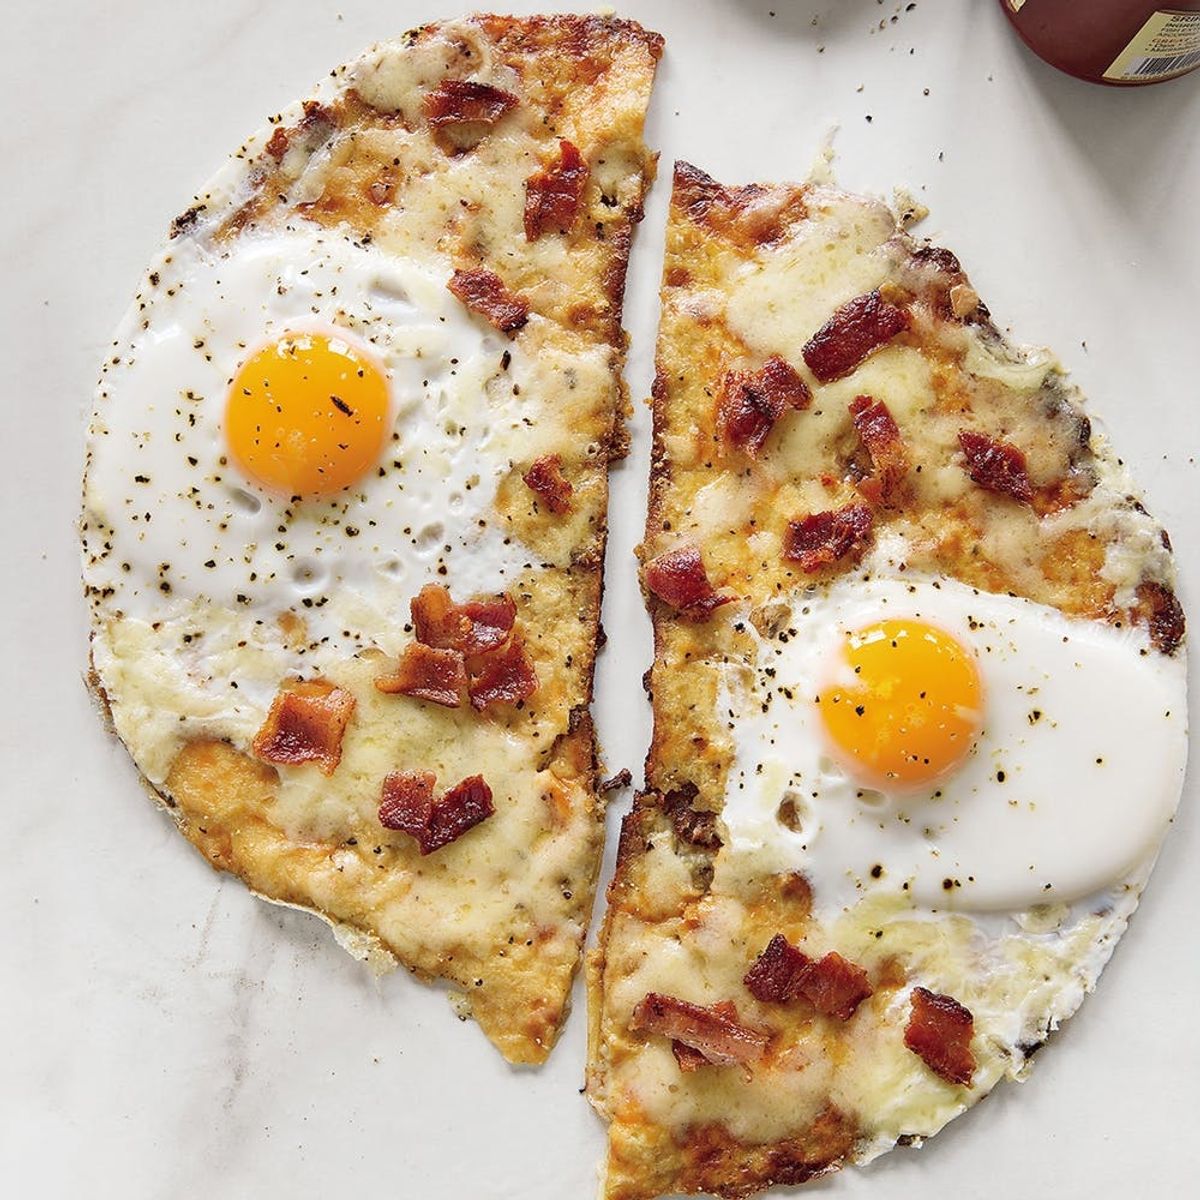 The Low-Carb Solution to Egg in a Hole